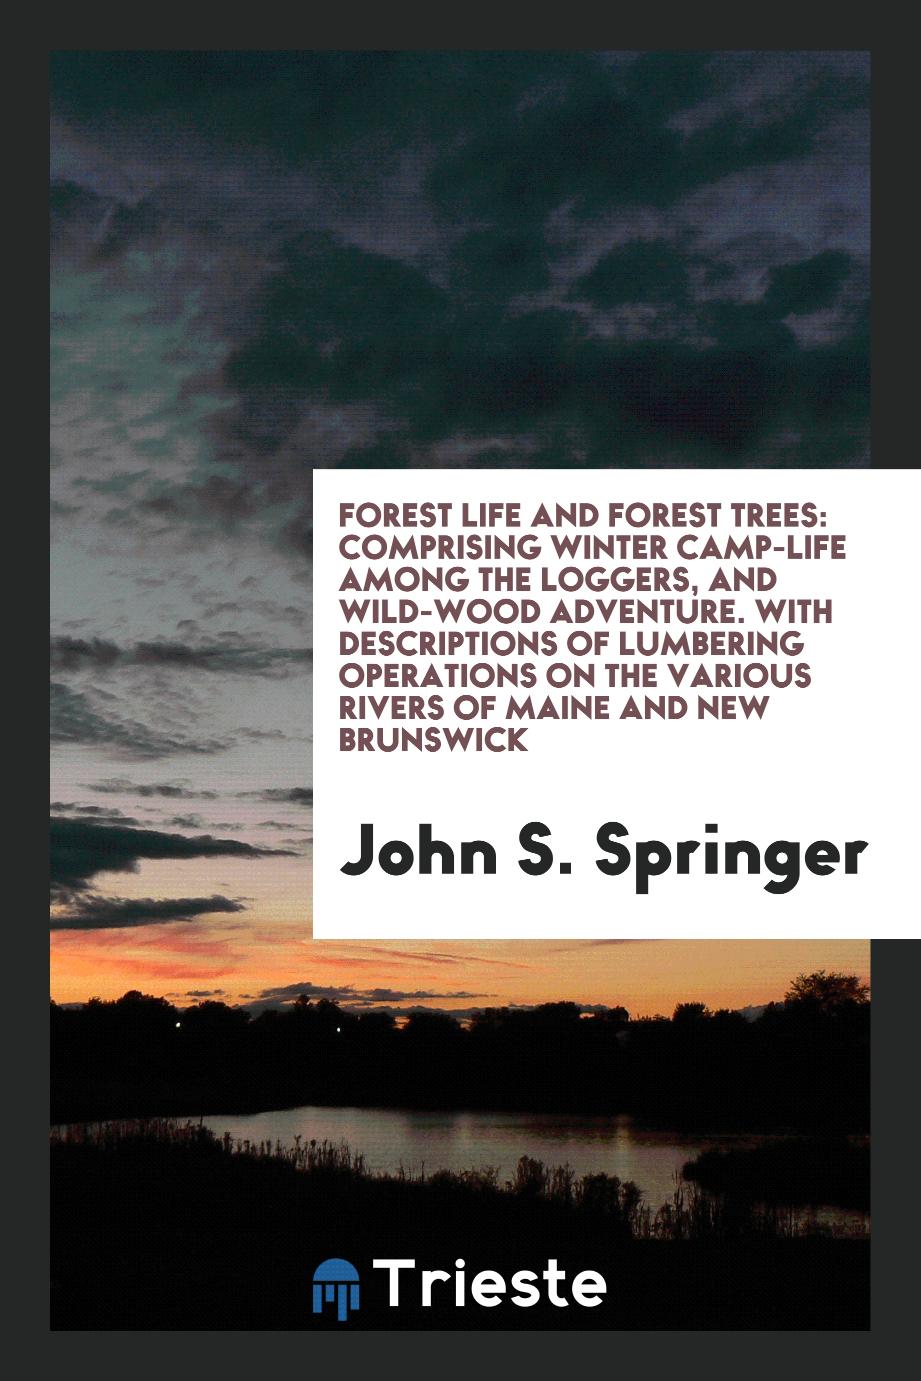 Forest life and forest trees: comprising winter camp-life among the loggers, and wild-wood adventure. With descriptions of lumbering operations on the various rivers of Maine and New Brunswick